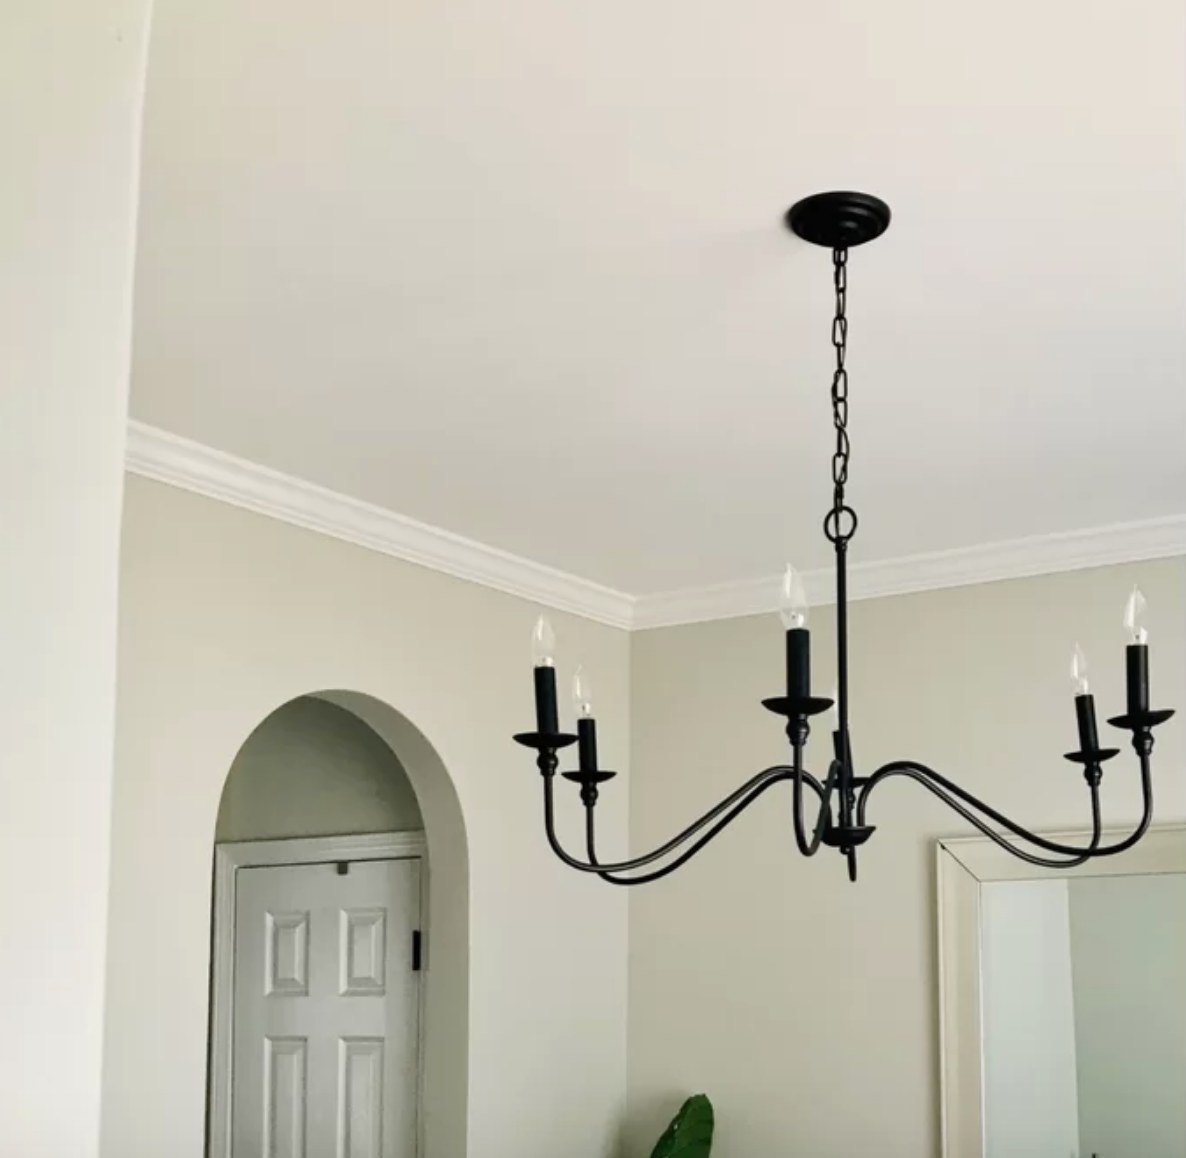 Black chandelier hanging from ceiling